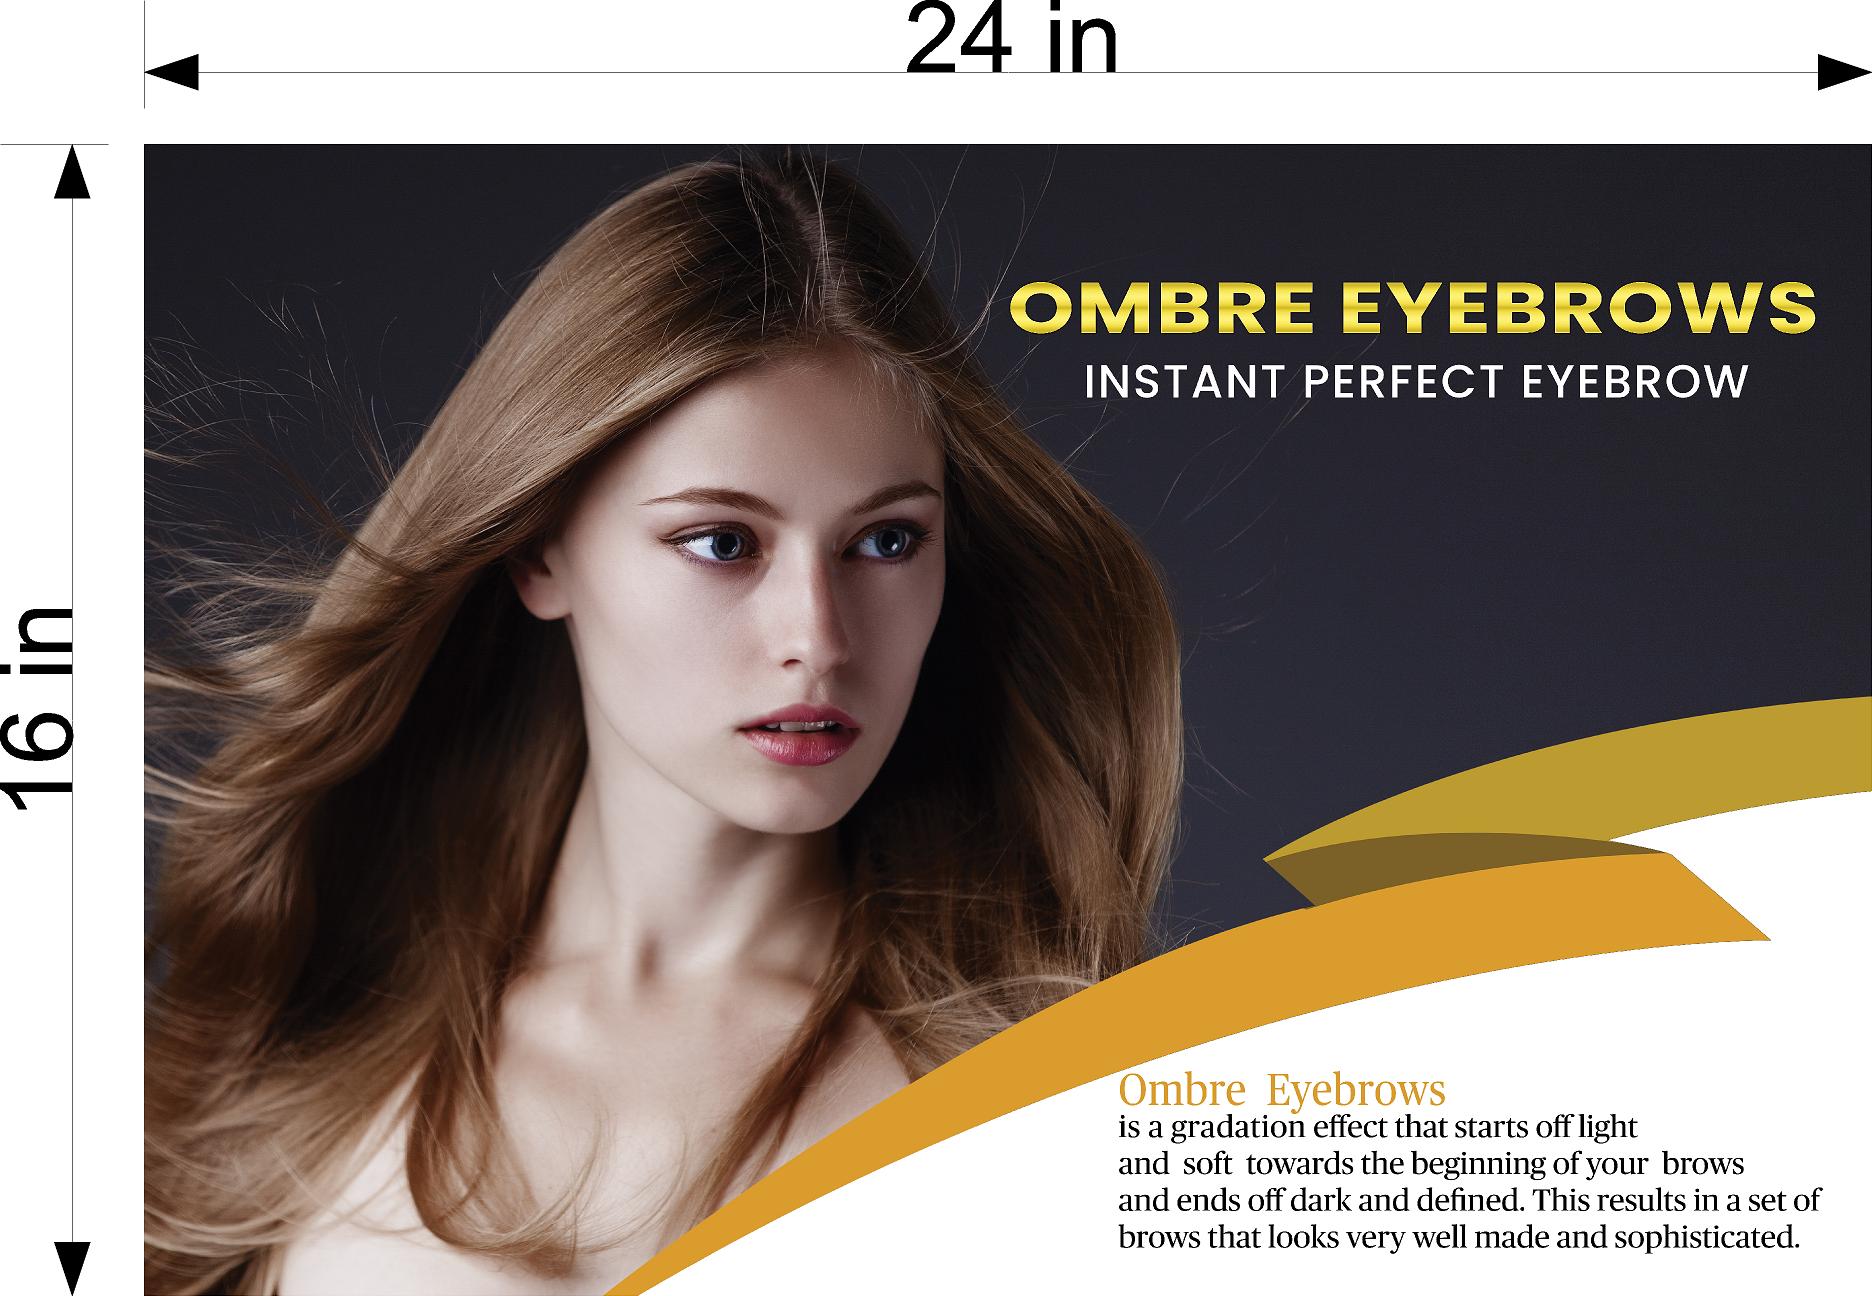 Ombre Eyebrows 10 Photo-Realistic Paper Poster Premium Interior Inside Sign Advertising Marketing Wall Window Non-Laminated Horizontal